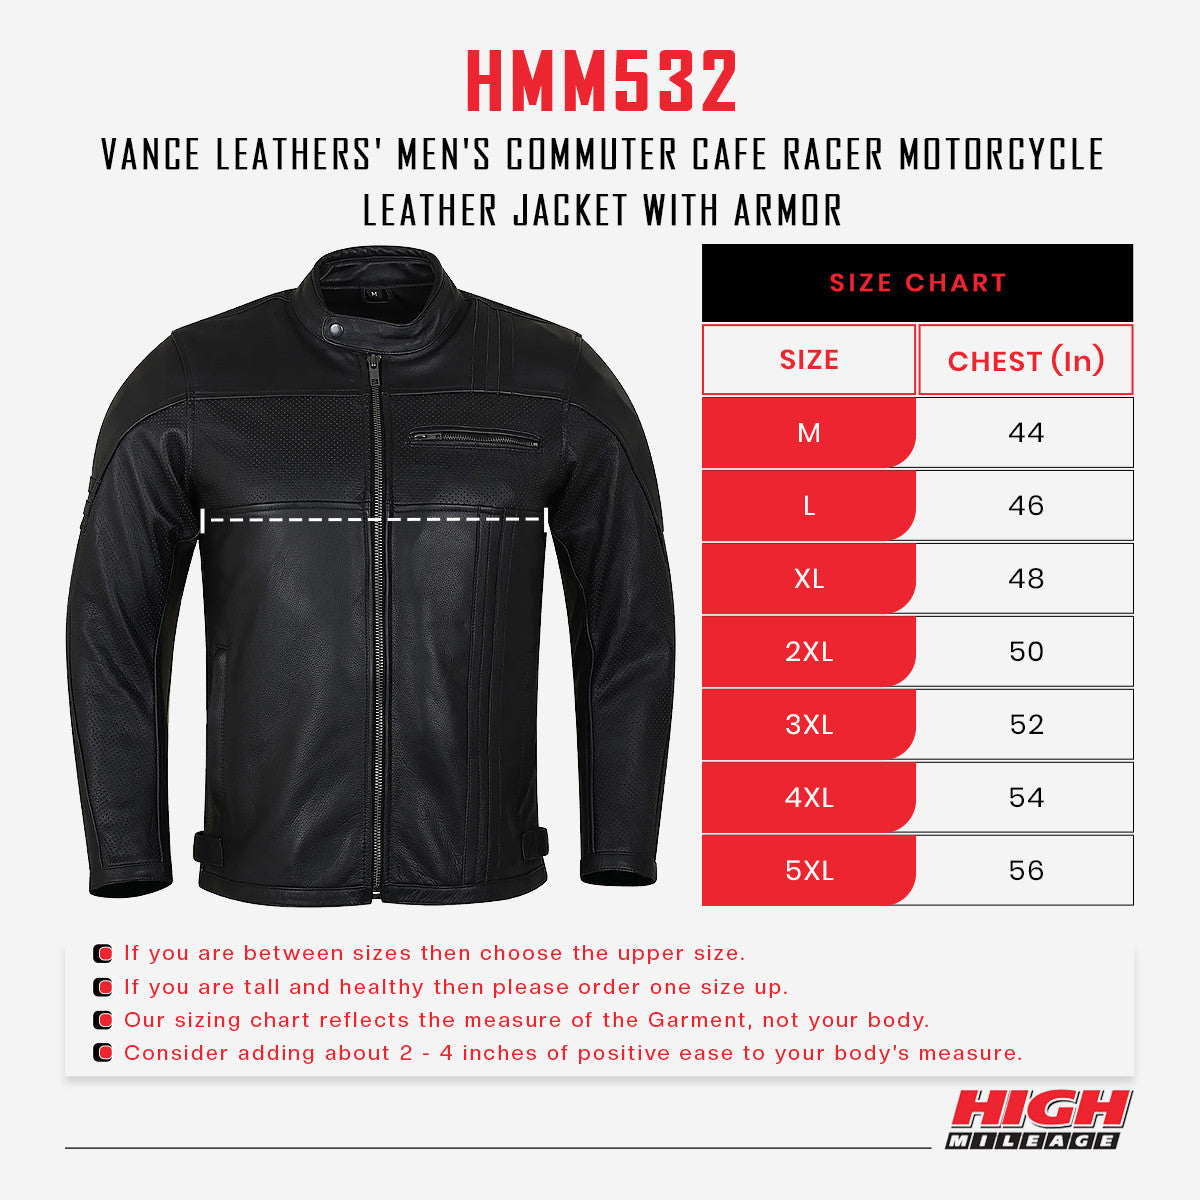 Vance Leather HMM532 Men's Commuter Cafe Racer Motorcycle Leather Jacket with Armor - size chart